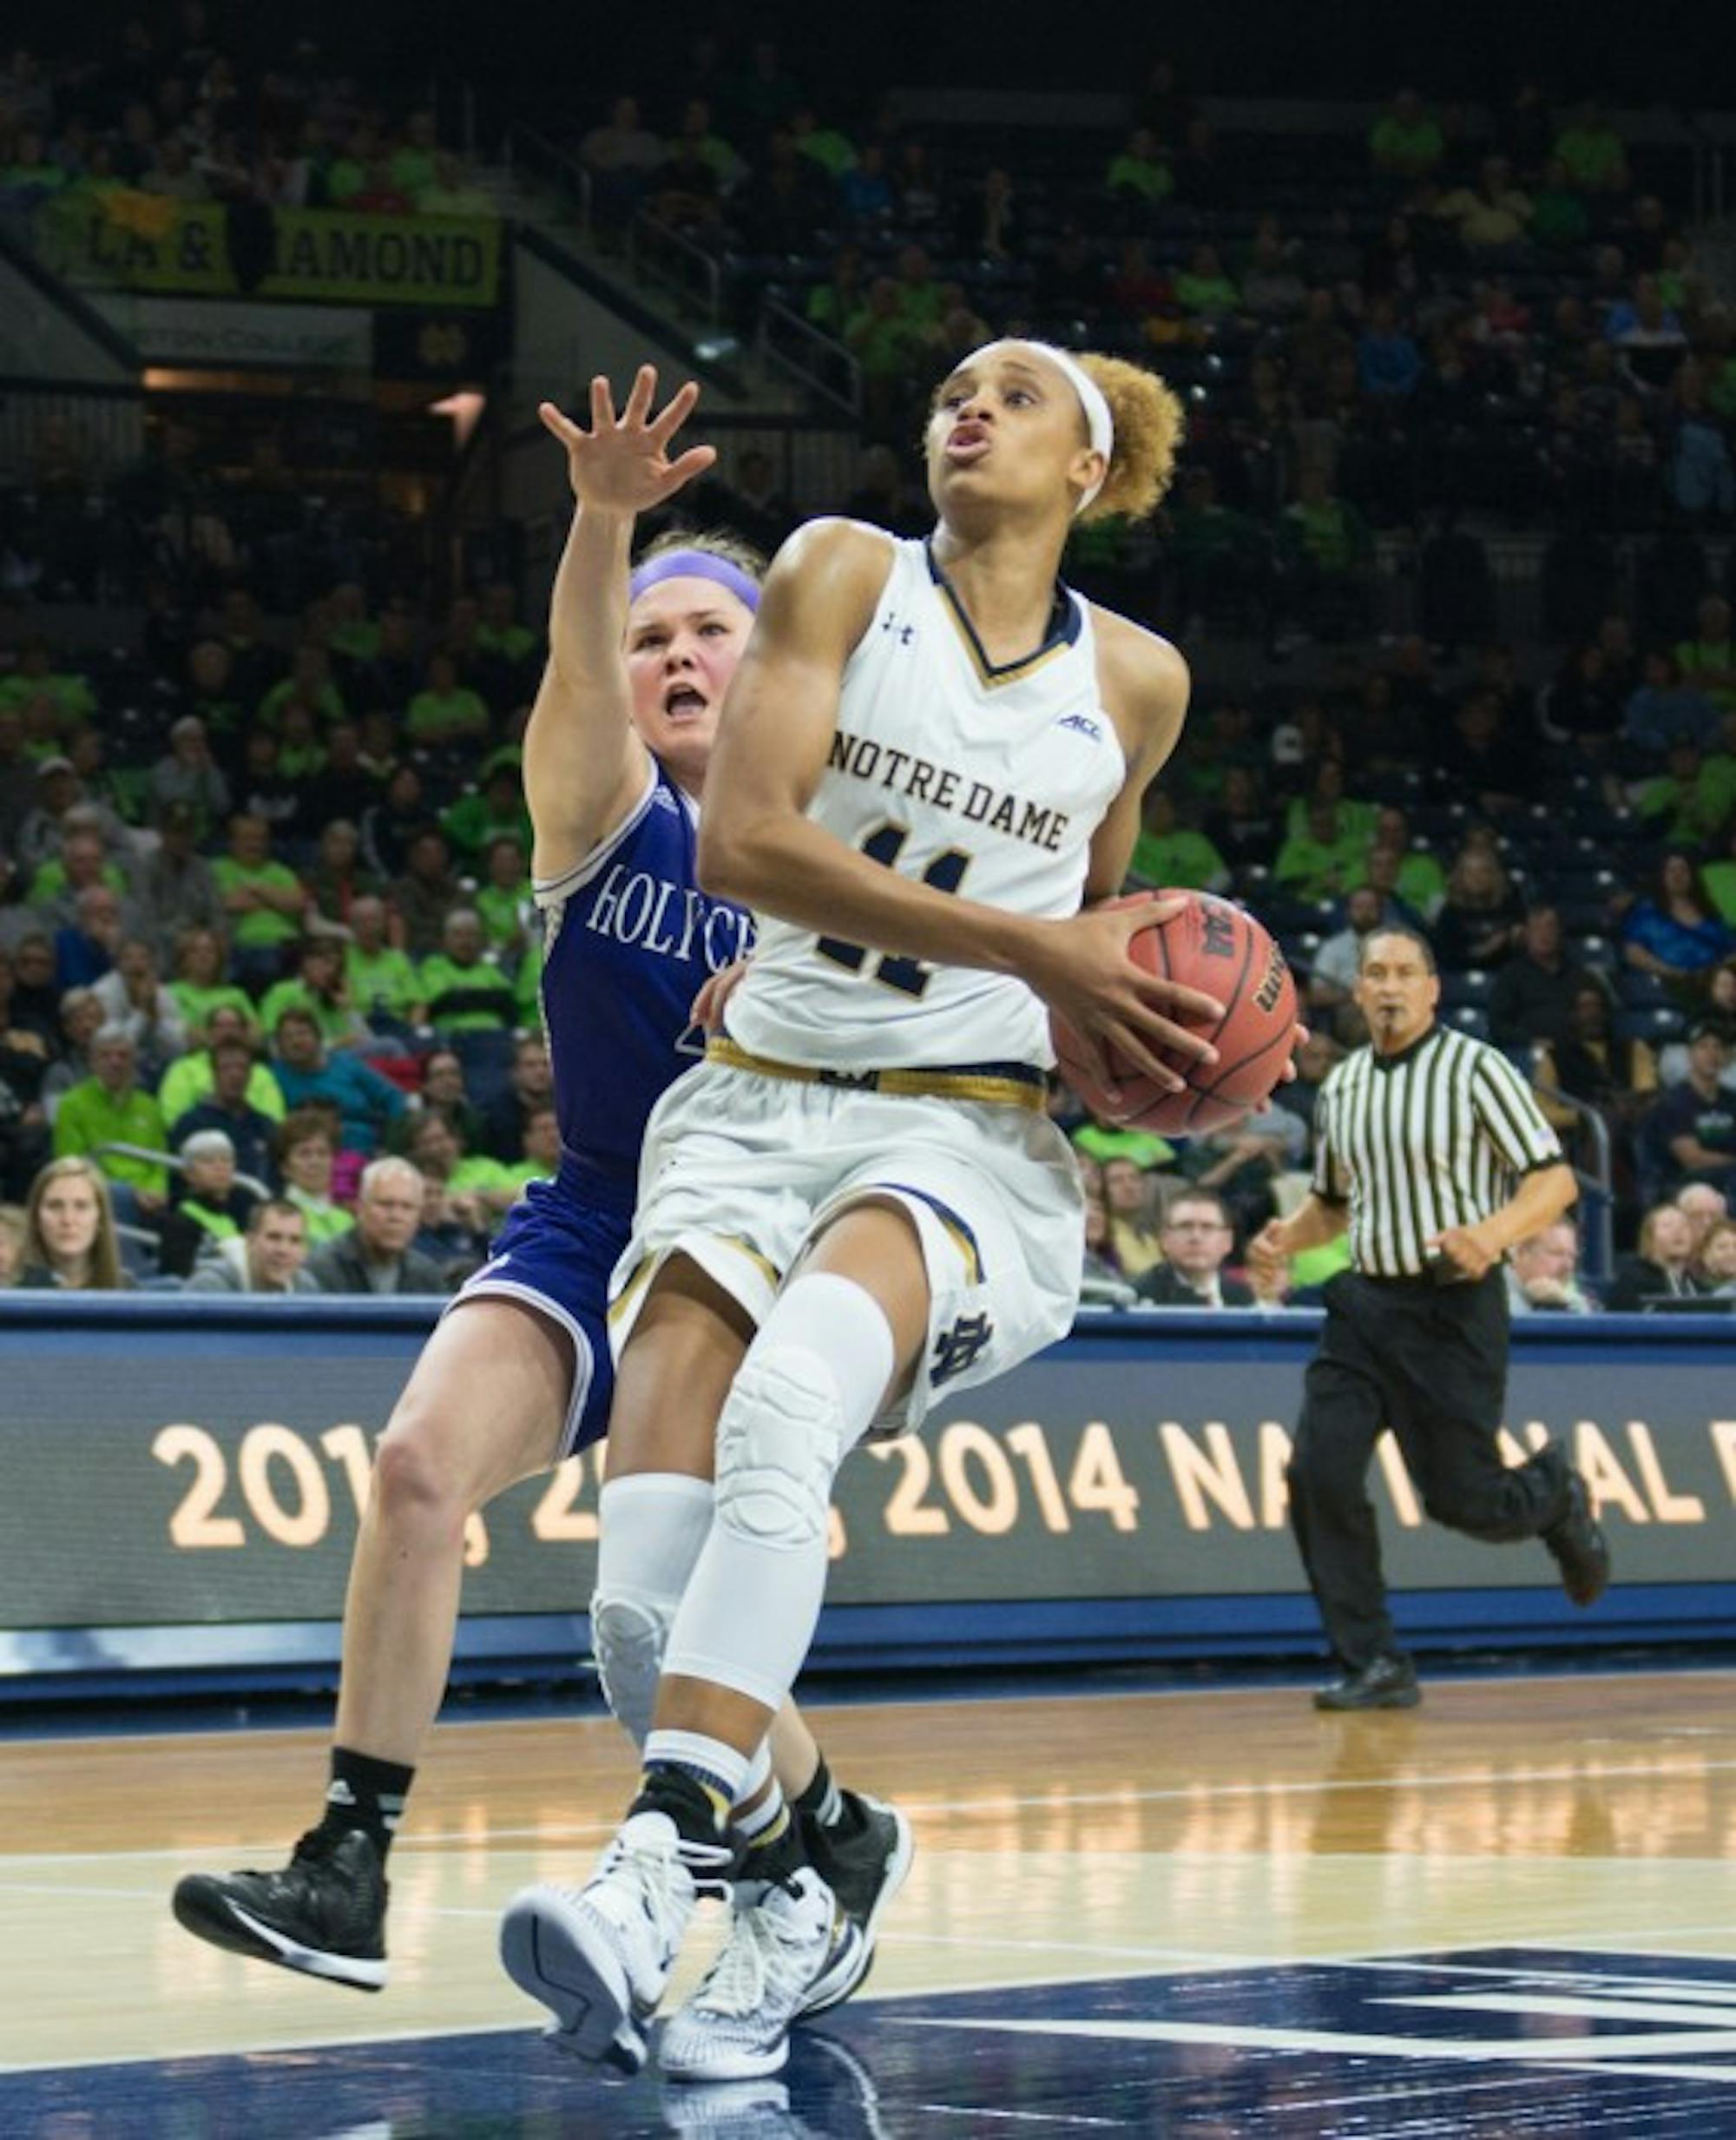 Notre Dame freshman forward Brianna Turner drives to the basket in a 104-29 defeat of Holy Cross on Nov. 23.